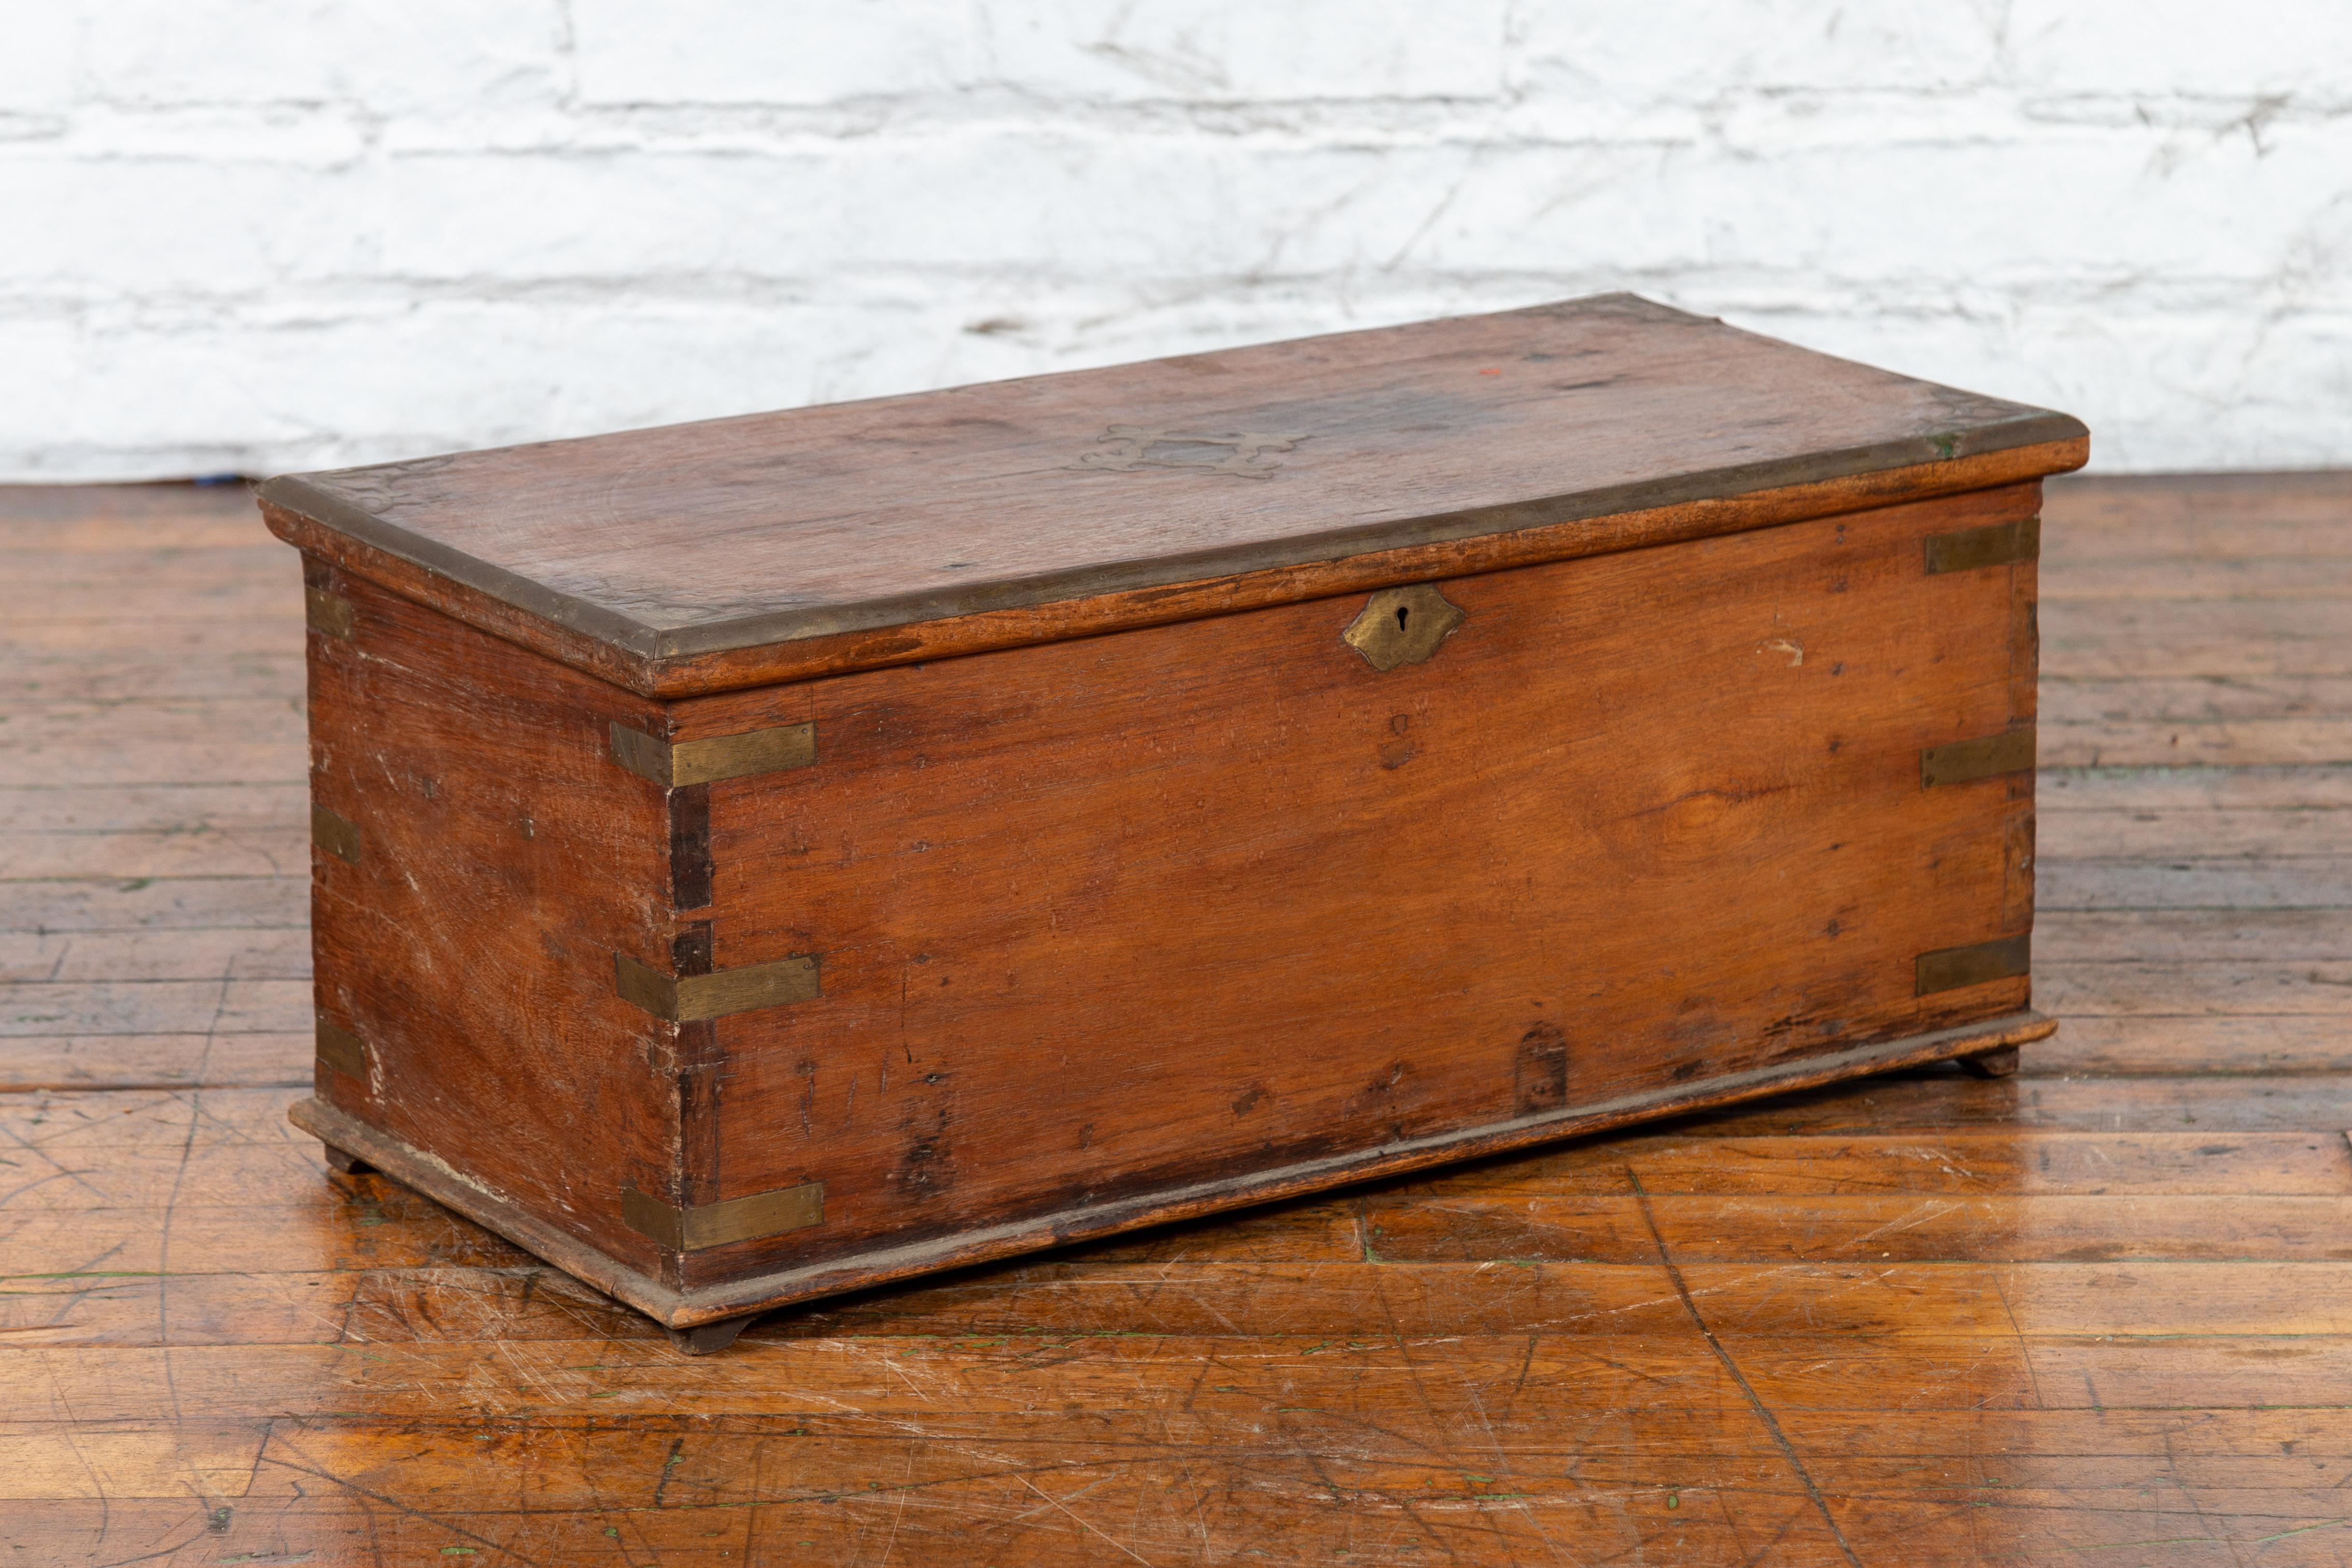 An antique Indian wooden trunk from the 19th century, with brass inlay and bracket feet. Created in India during the 19th century, this wooden trunk features a rectangular lid adorned with an ornate brass inlay, opening to reveal an organized